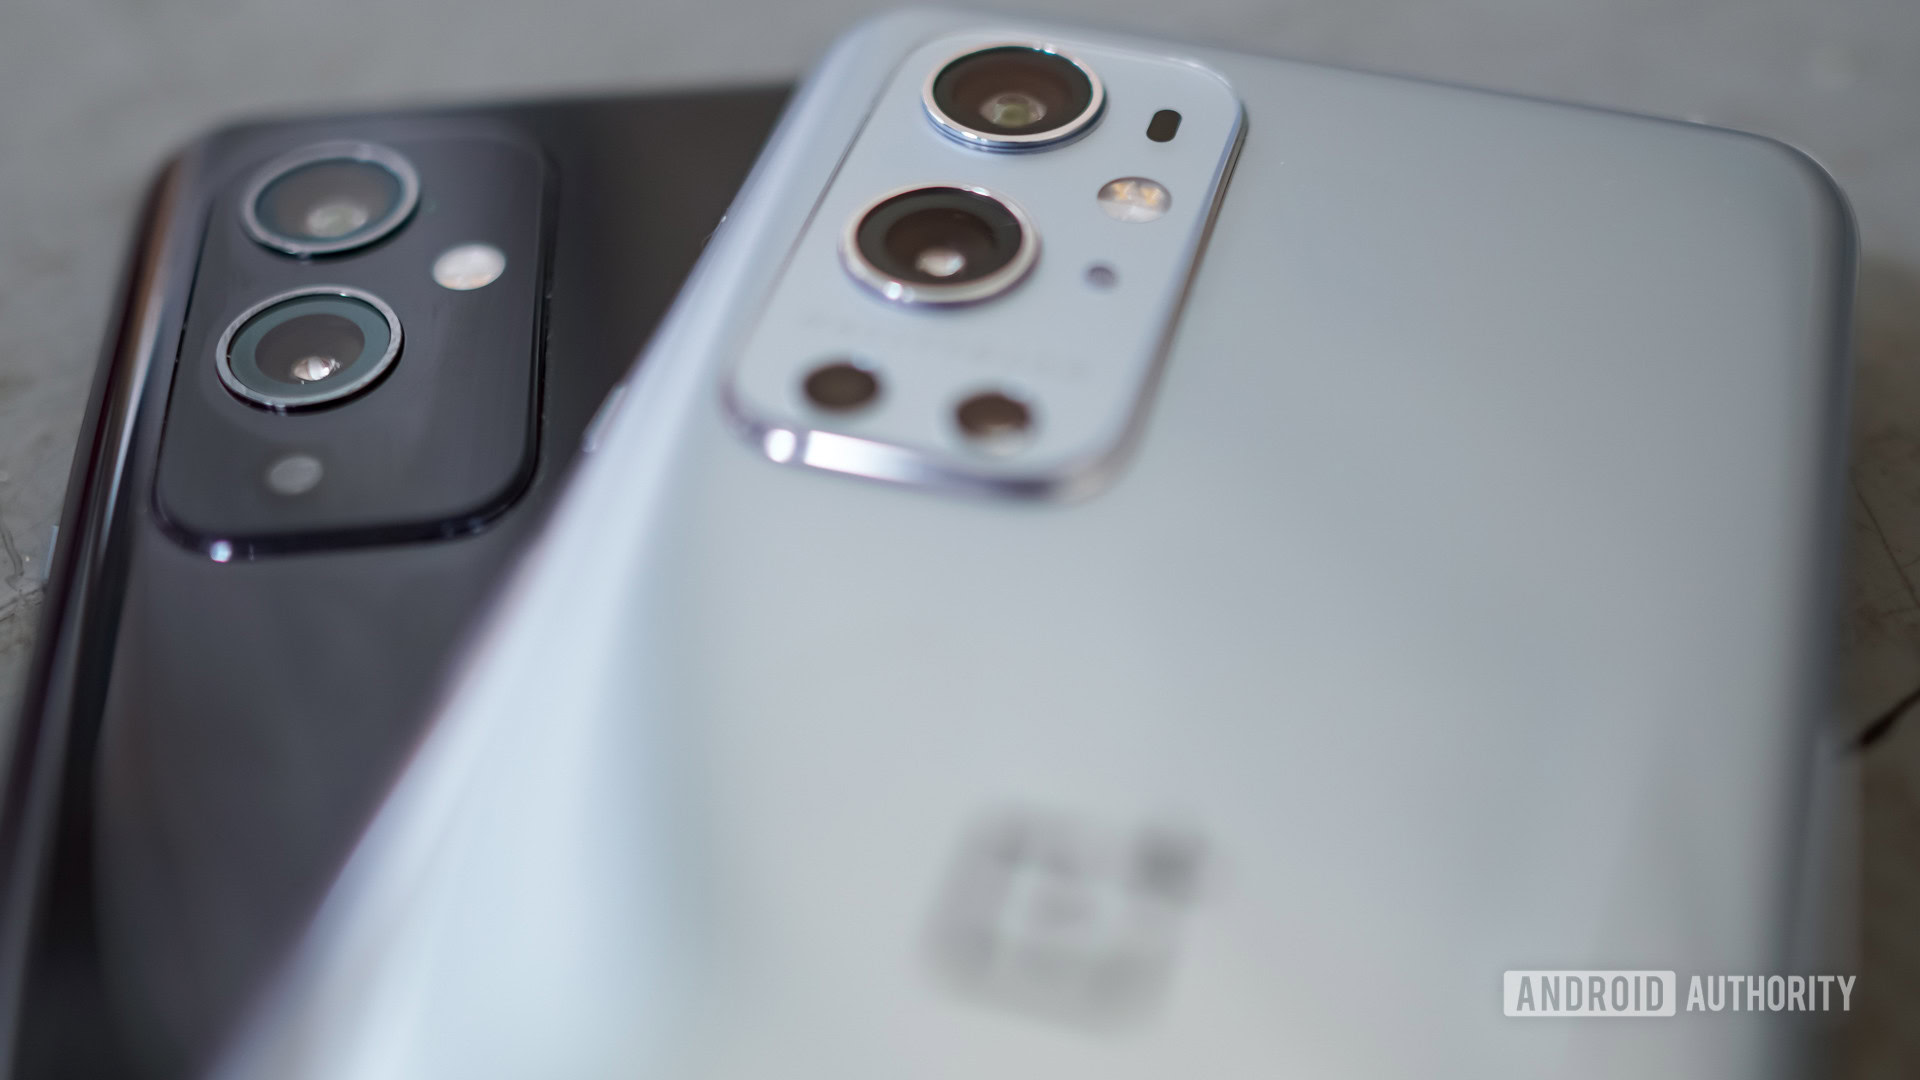 OnePlus 9 Pro and OnePlus 9 Low Angle Camera Modules